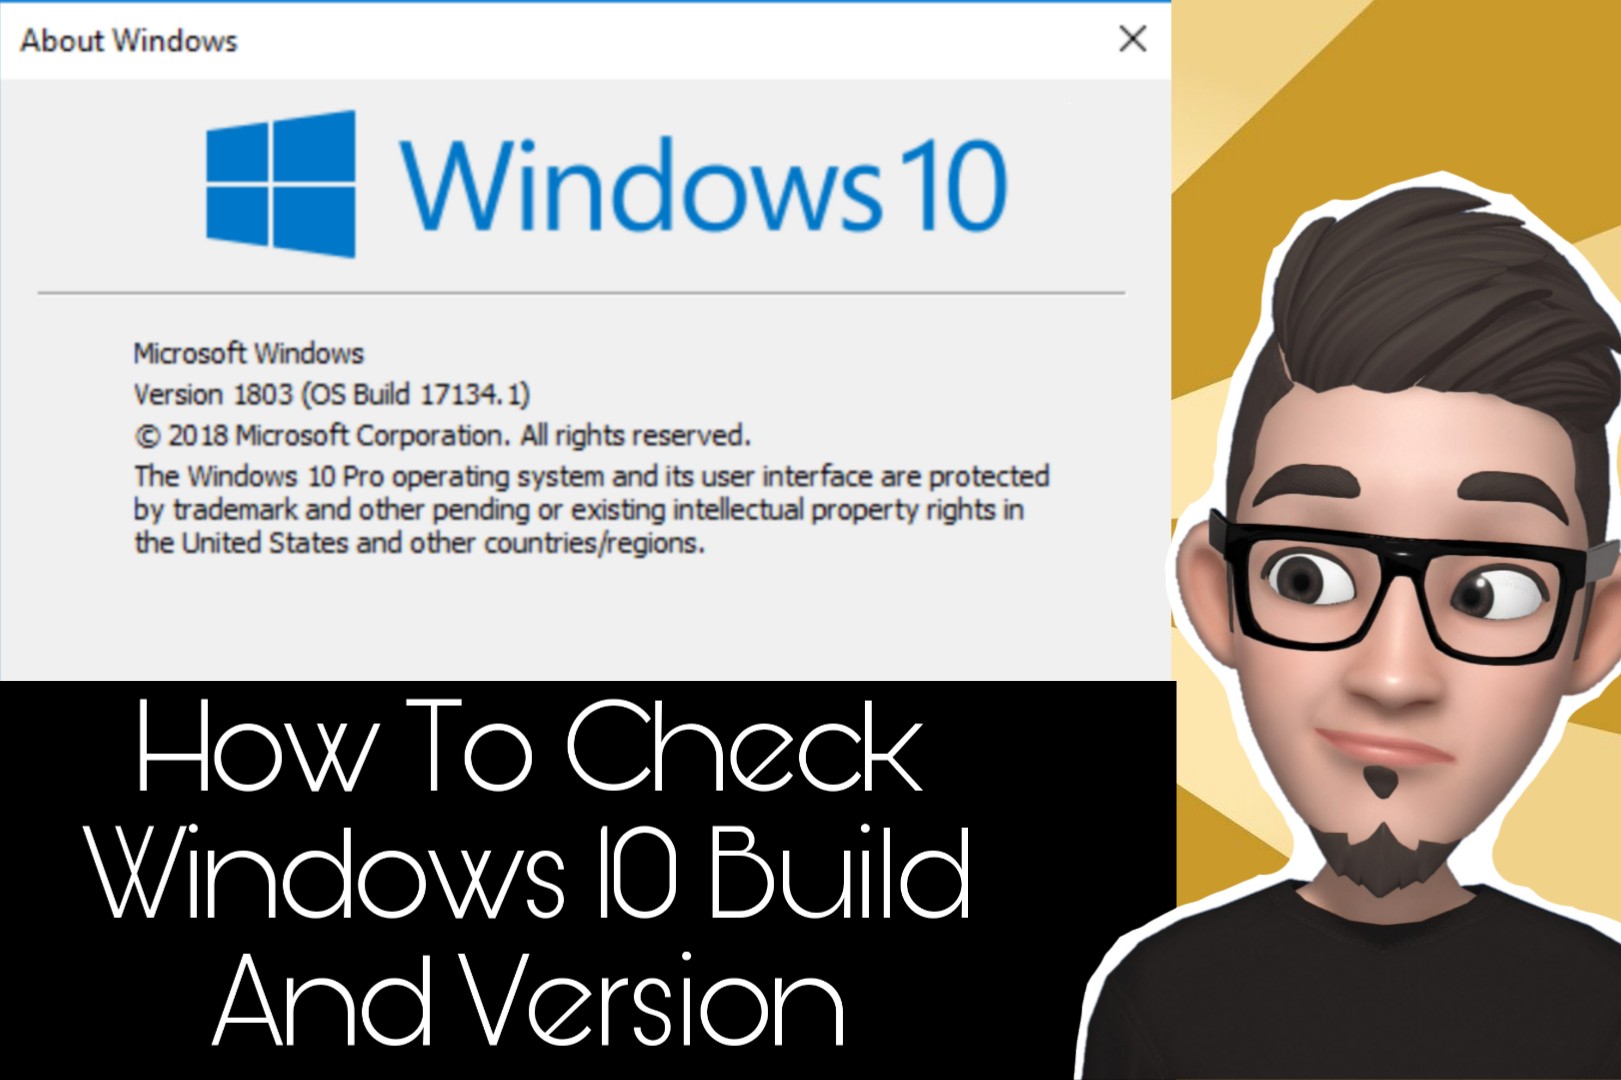 How To Check Windows 10 Build And Version